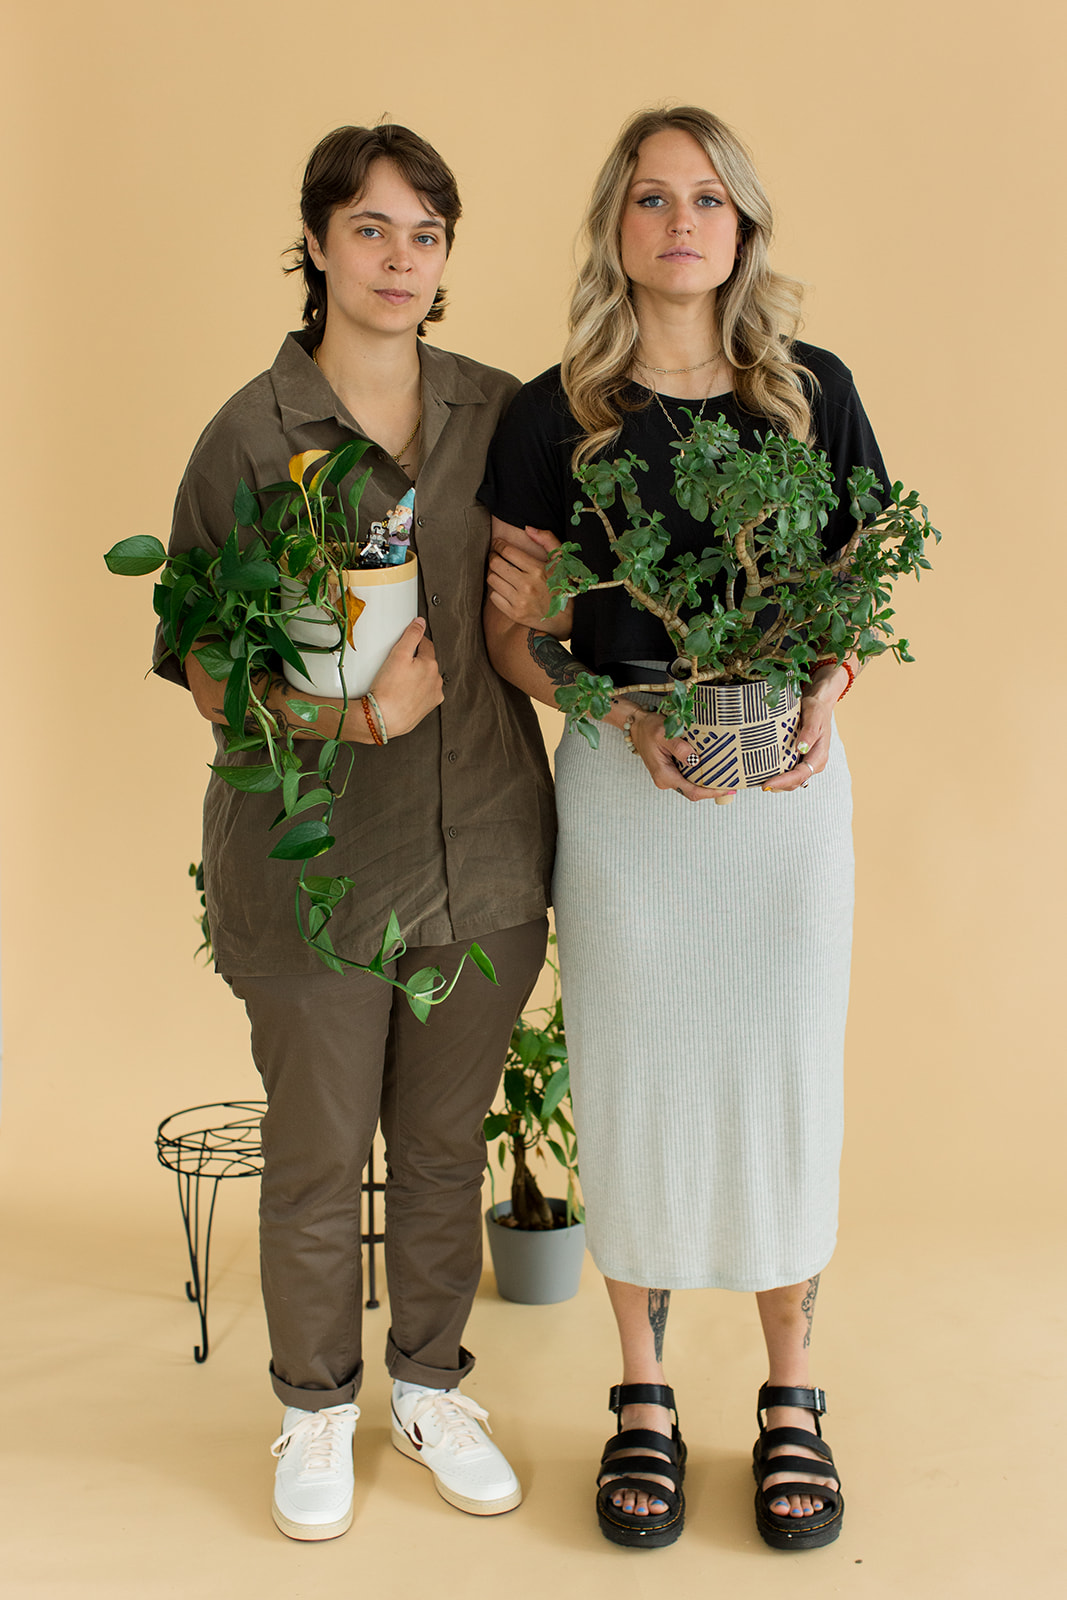 A couple looks at the camera while holding their beloved houseplants for a creative photo